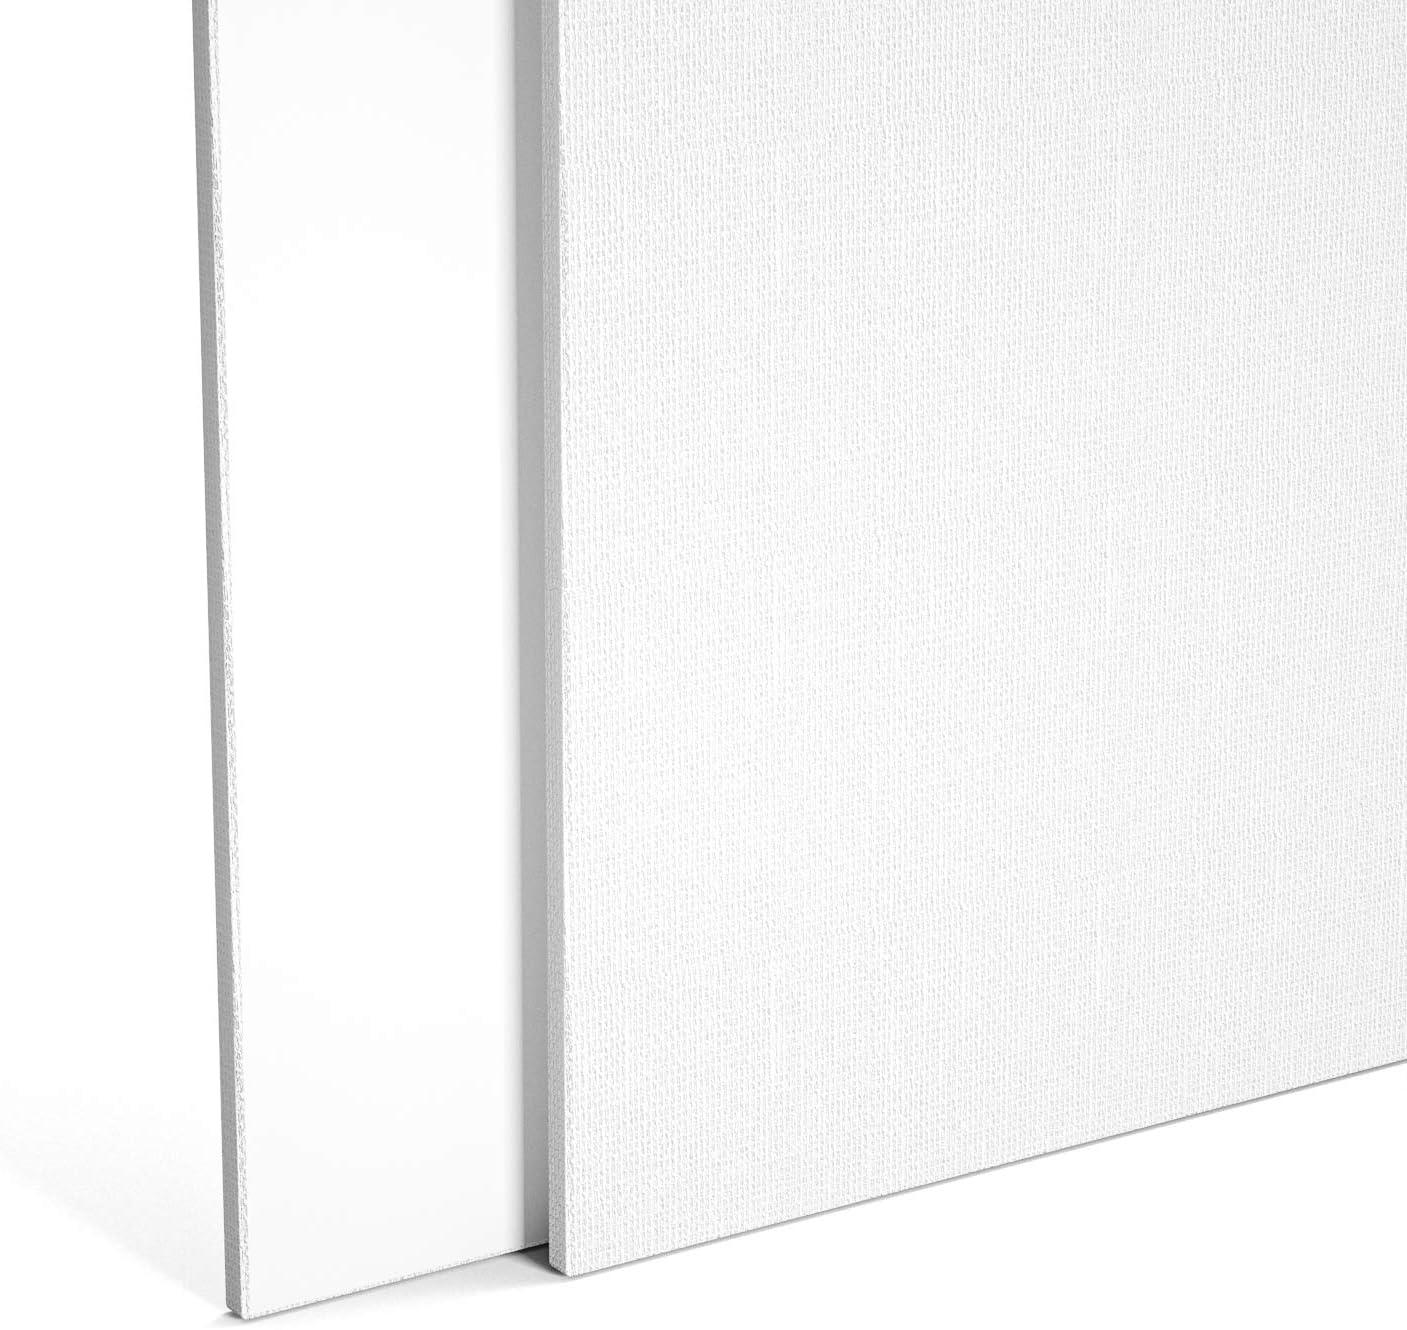  GOTIDEAL Canvases for Painting, 16x20 inch of 5 Pack,  Professional Primed White Blank Flat Canvas Panels- 100% Cotton Artist  Canvas Boards for Acrylics Painting, Oil Watercolor Tempera